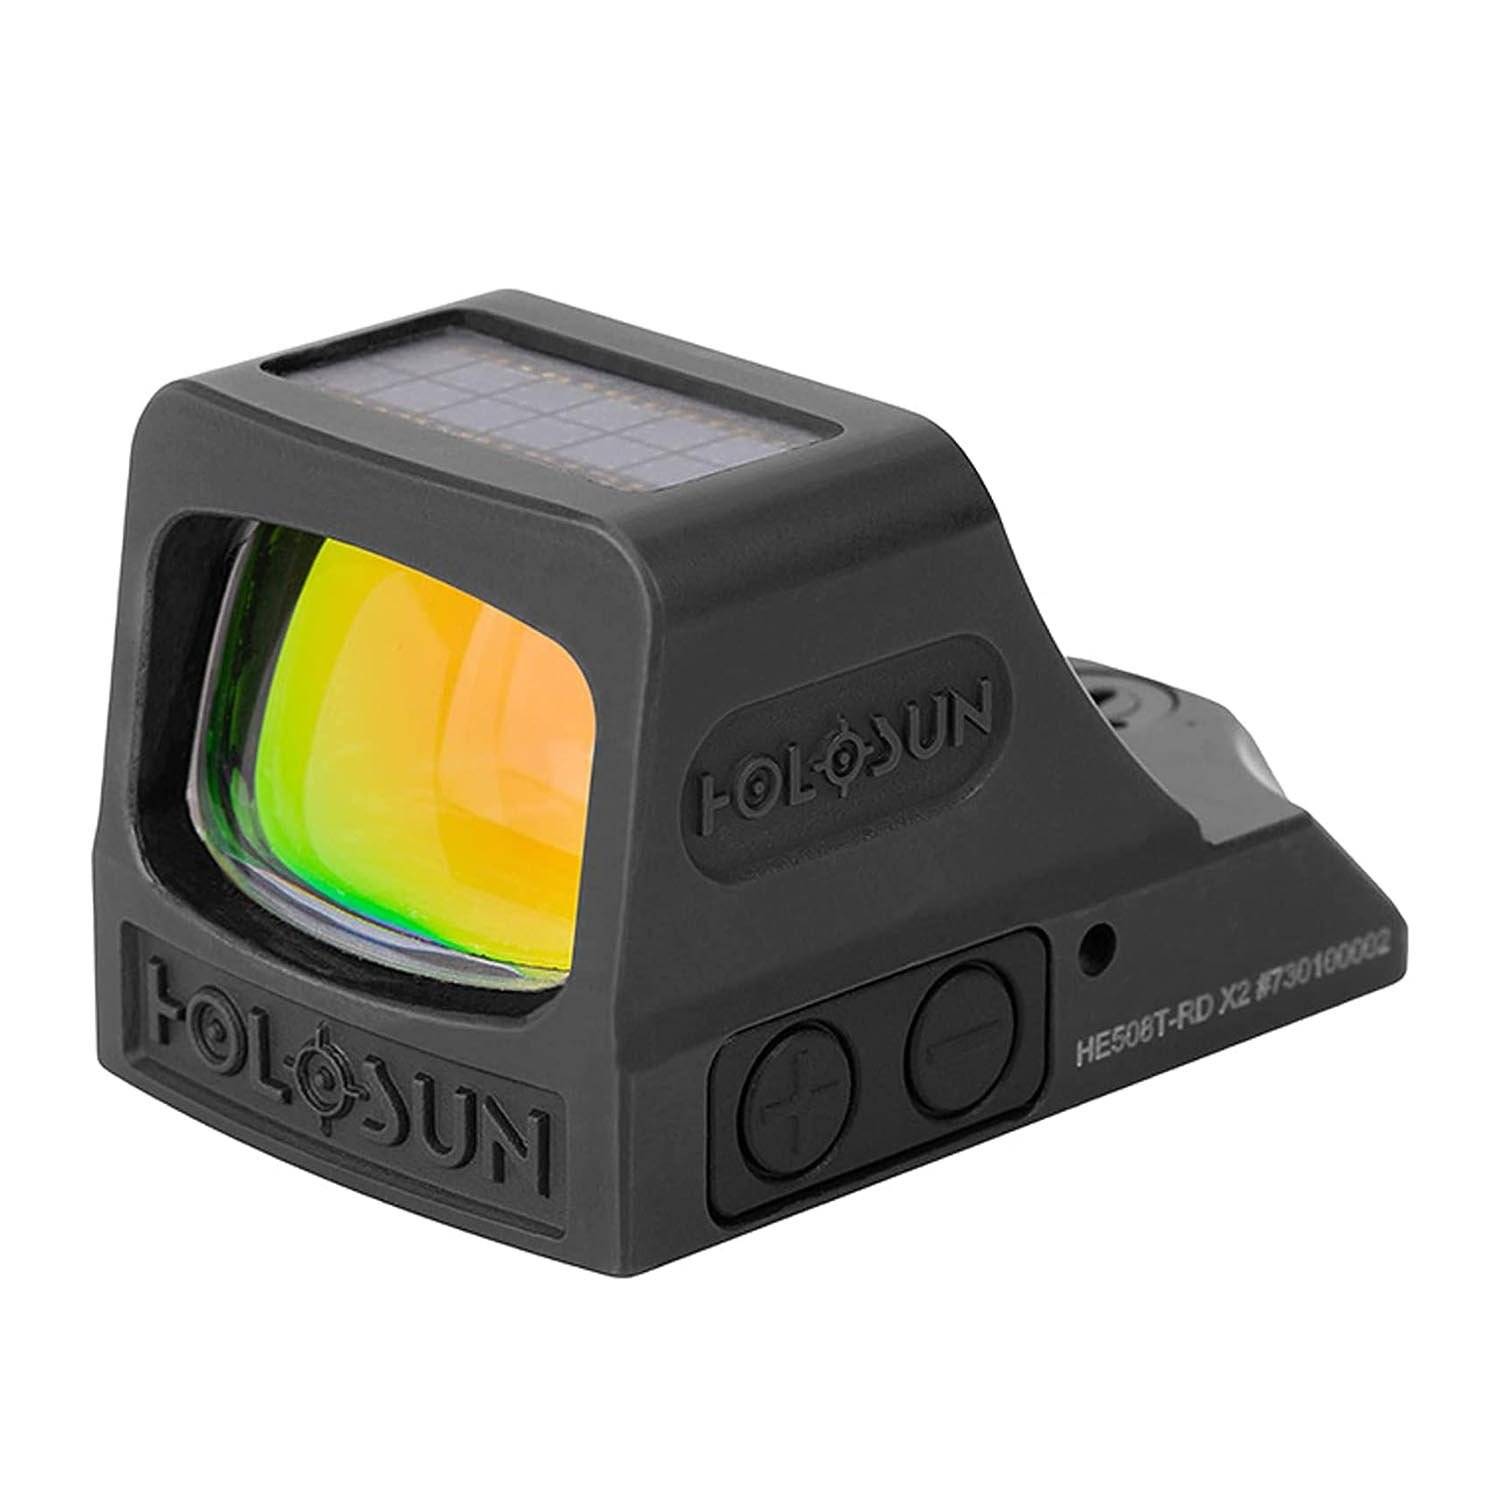 Holosun HE508T-RD X2 Multiple Reticle System Reflex Sight